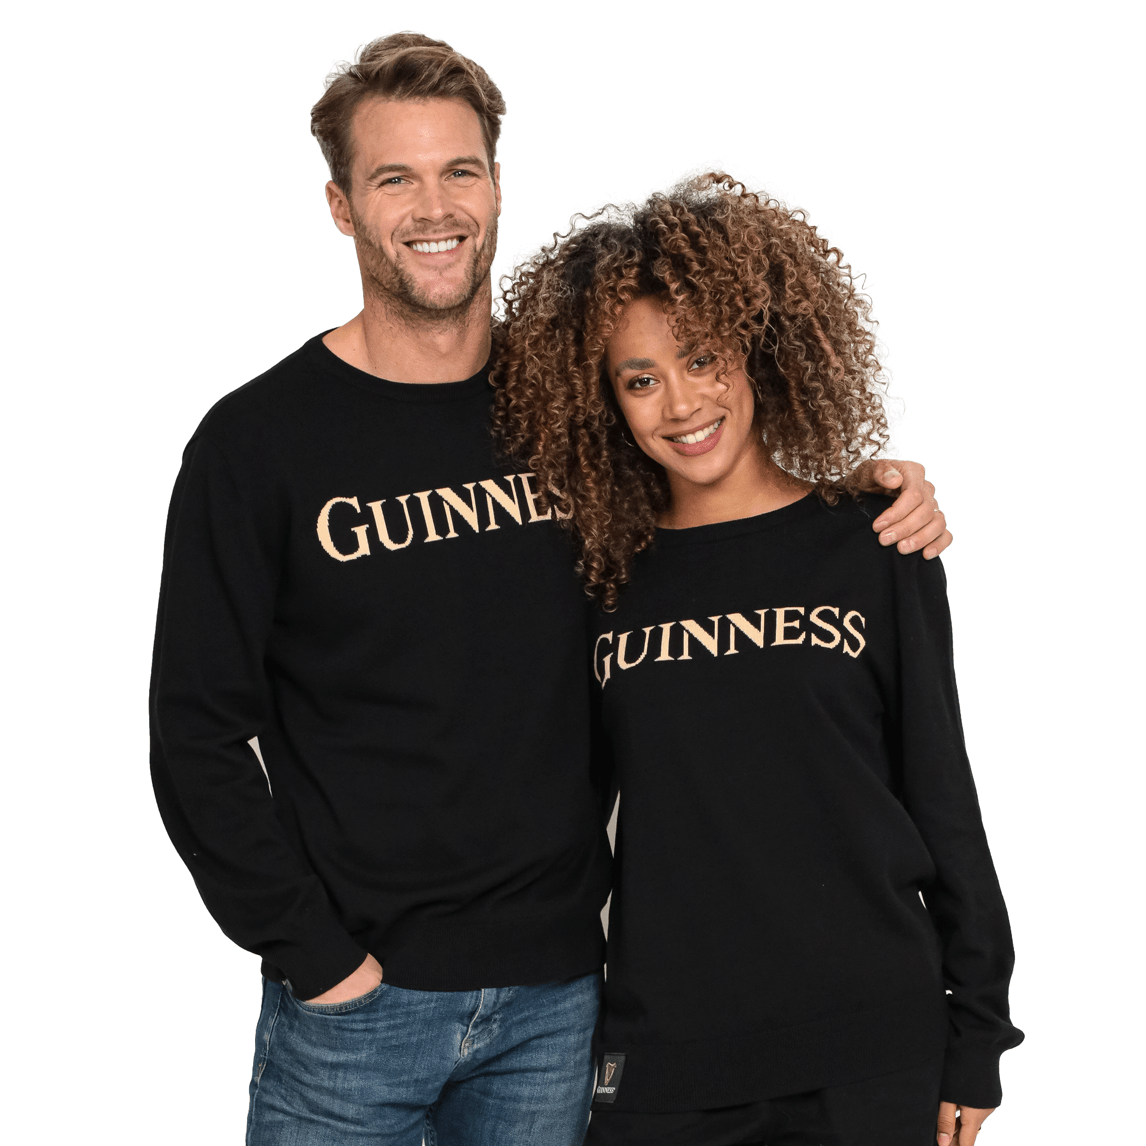 A man and woman wearing Guinness 100% Organic Cotton Jumpers made by Guinness.